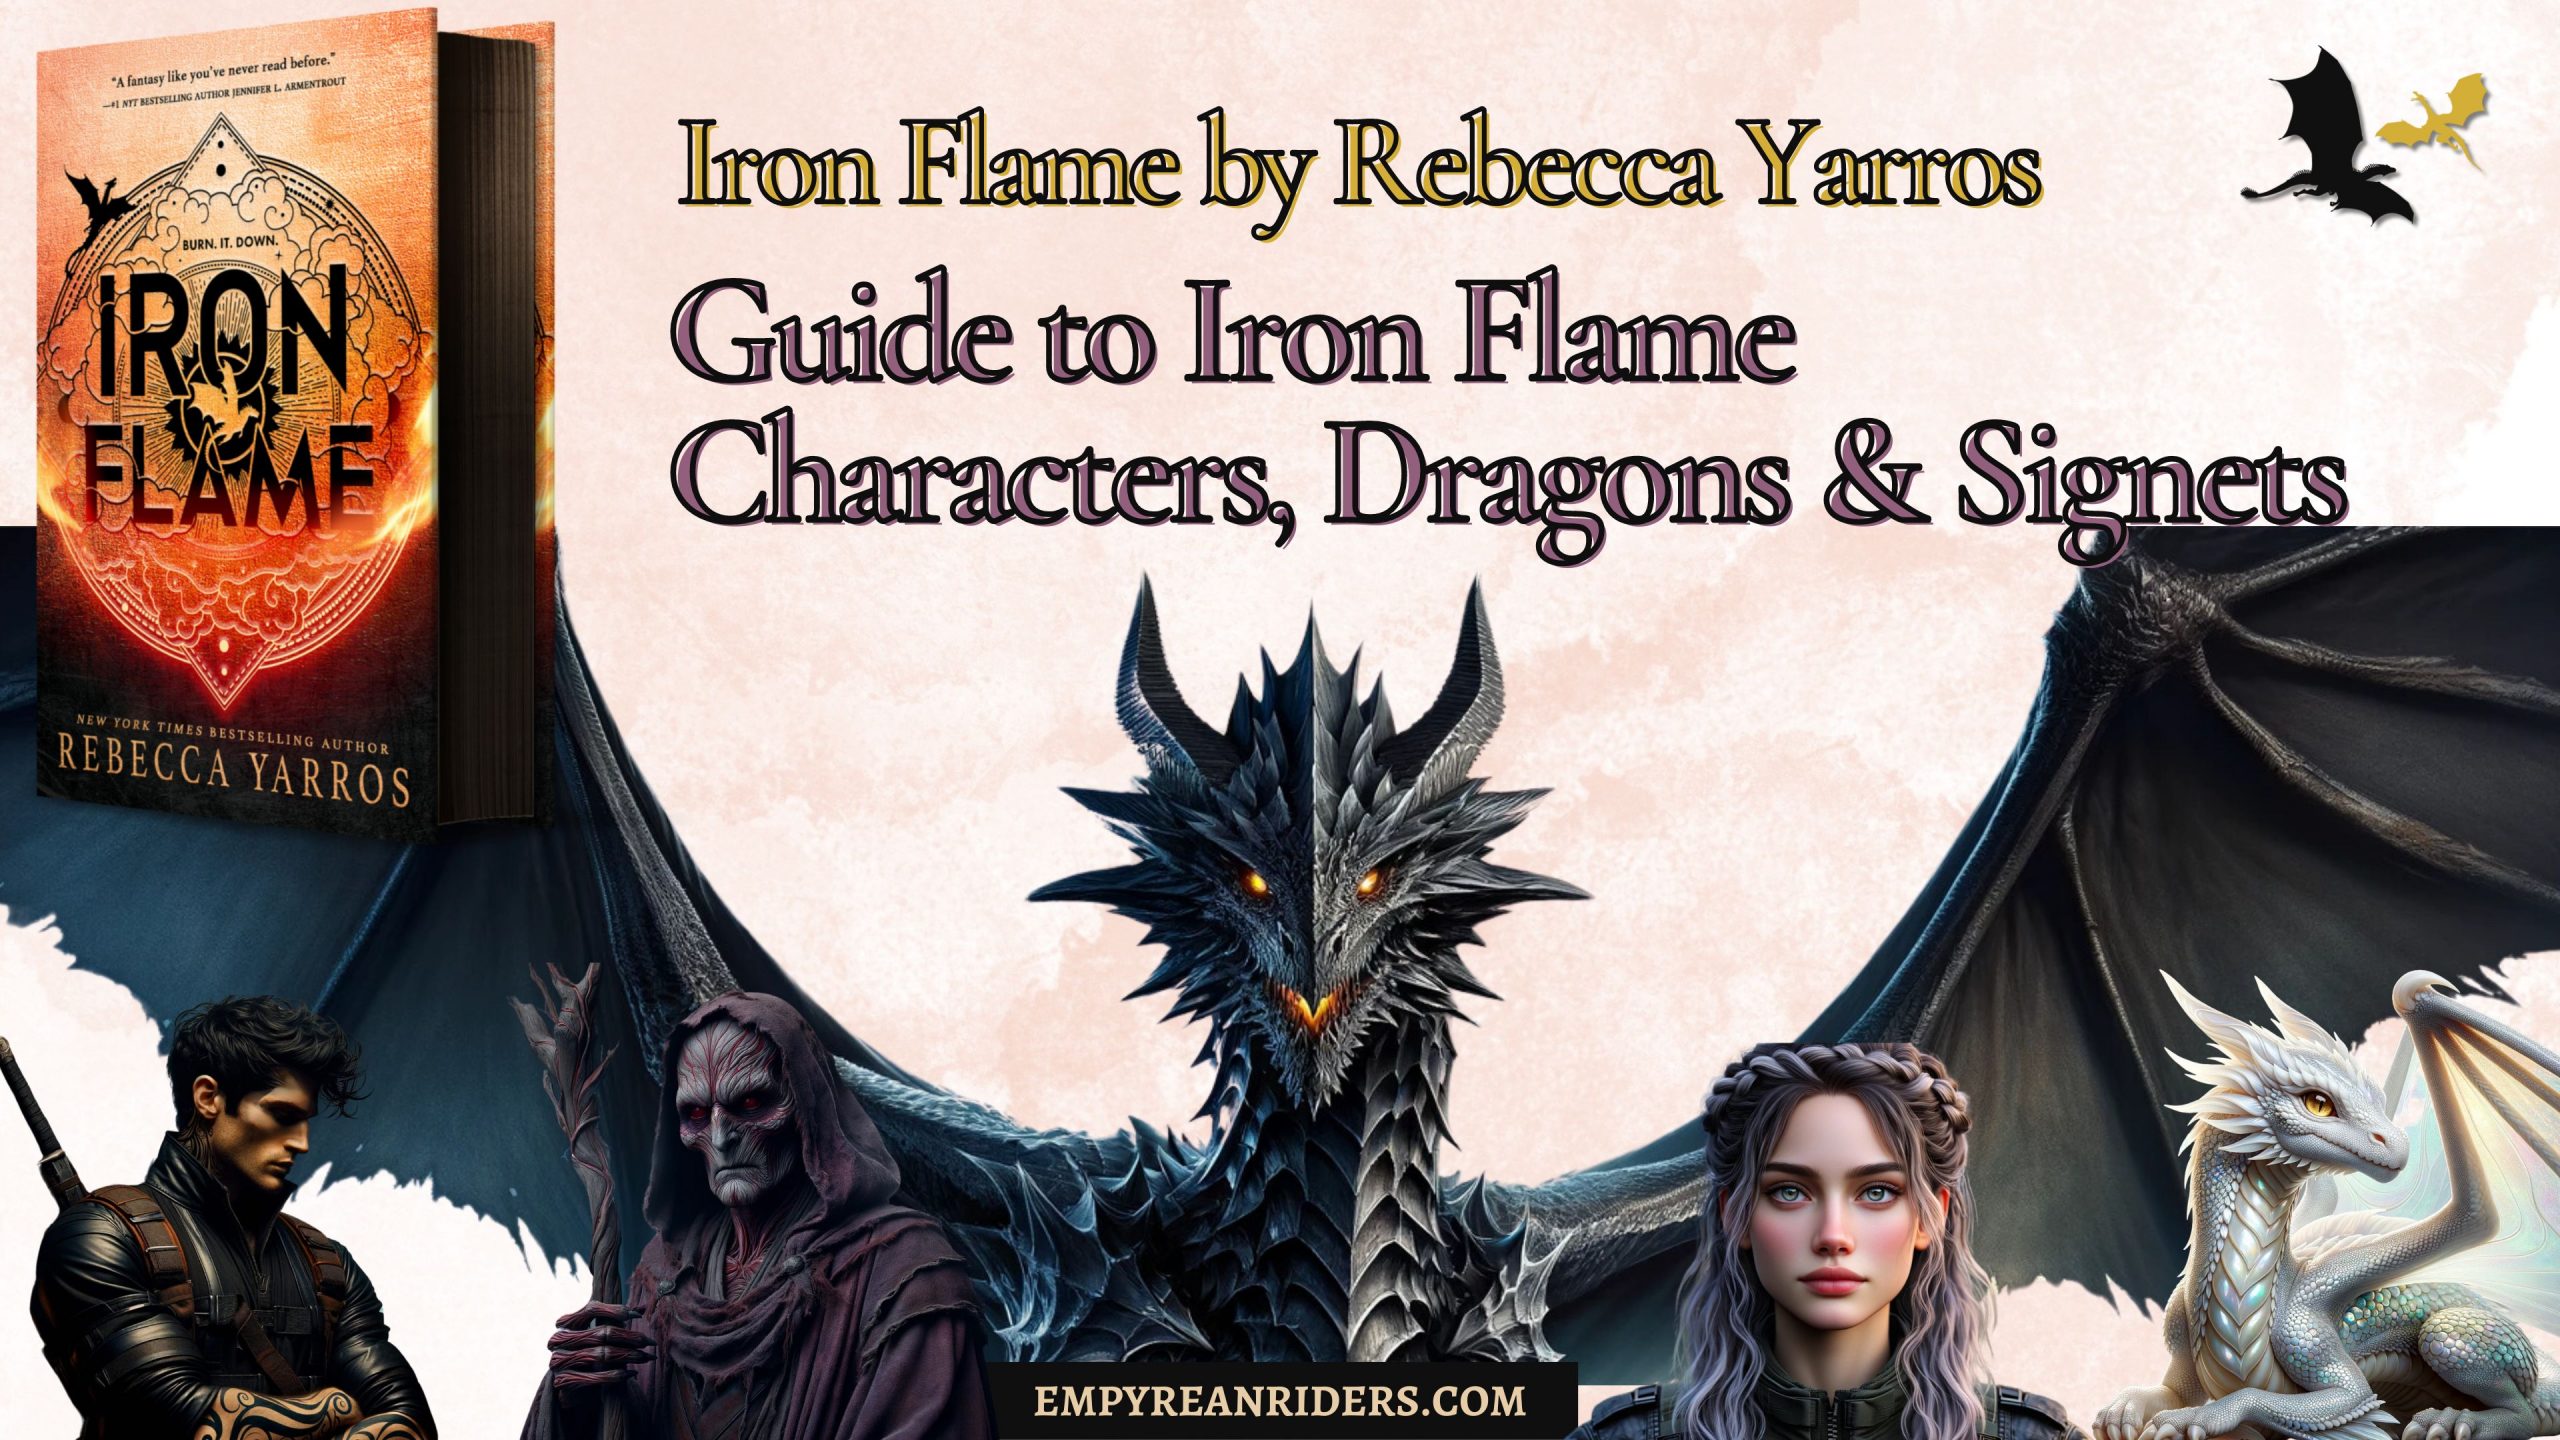 Guide to Iron Flame characters, dragons and signets